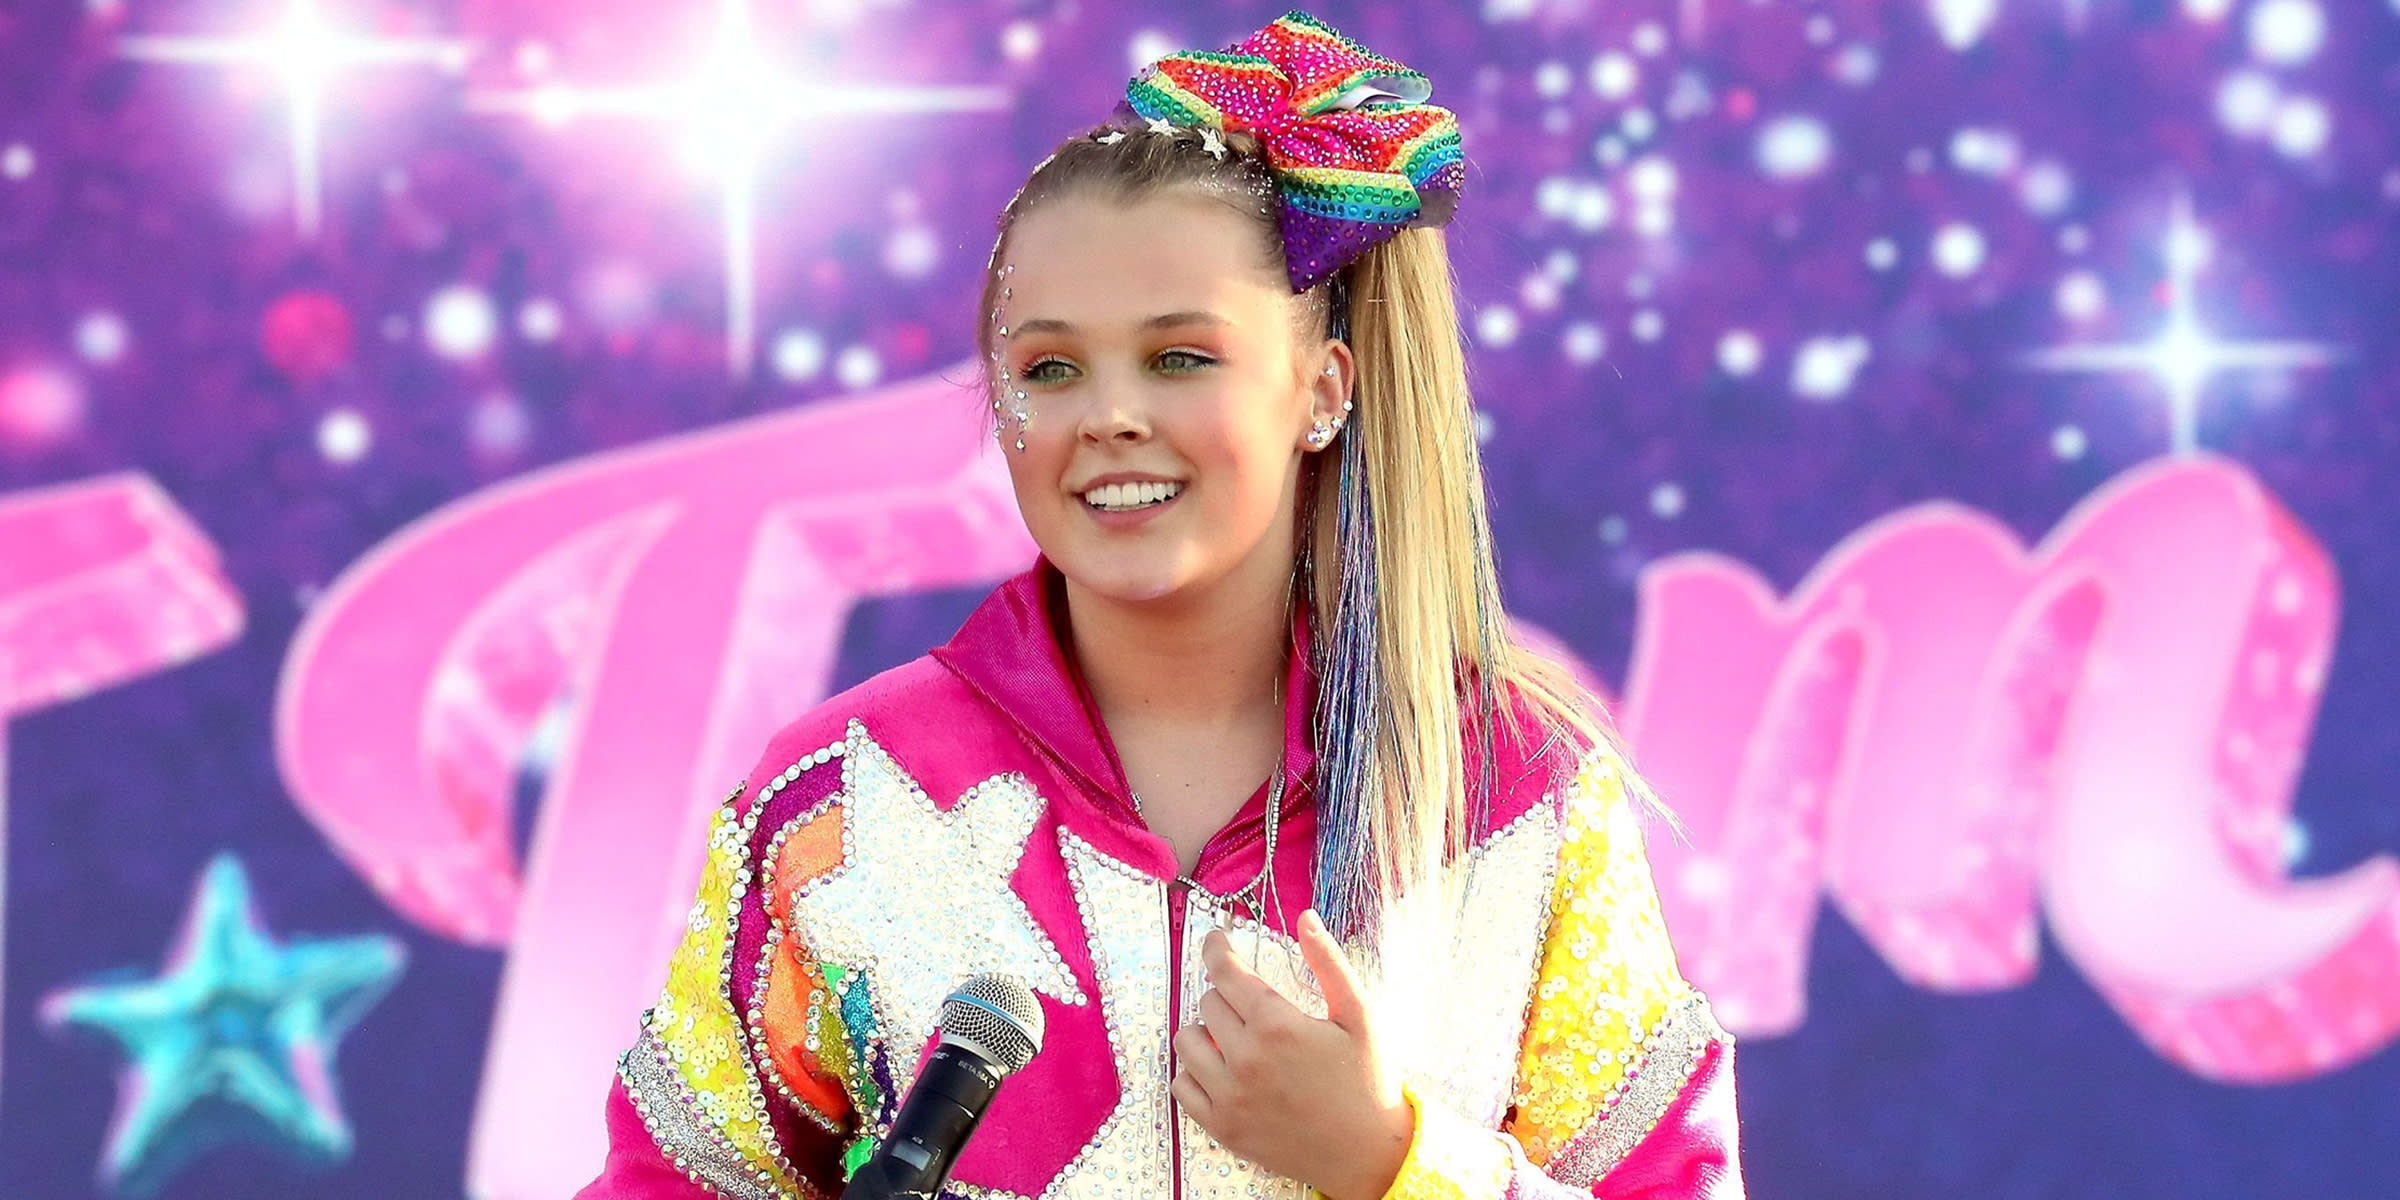 JoJo Siwa makes red carpet debut with girlfriend Kylie Prew — see the sweet pics!